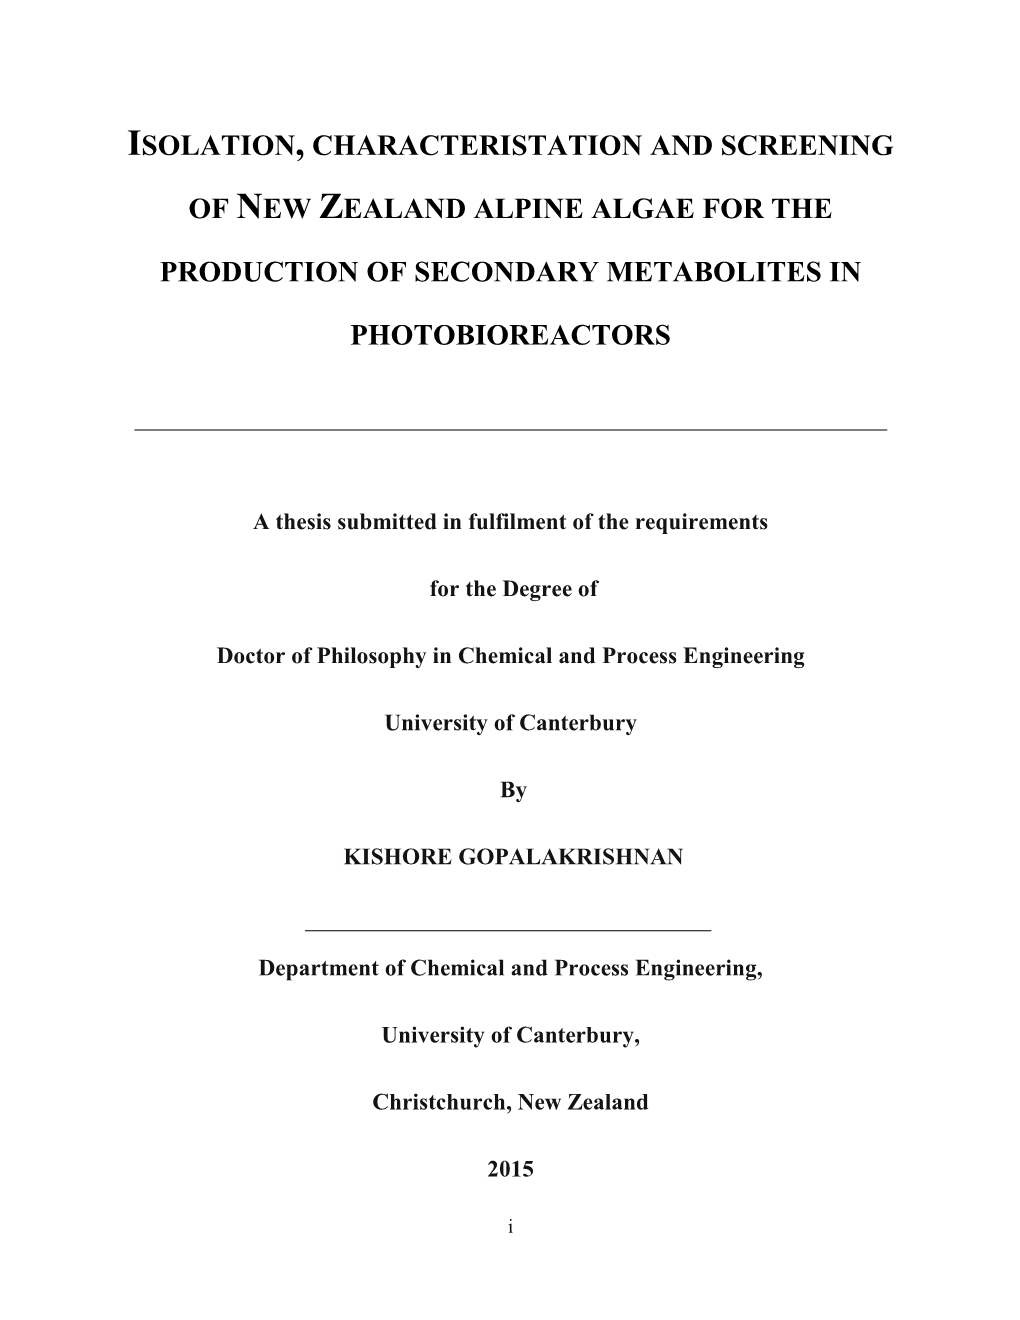 Of New Zealand Alpine Algae for the Production of Secondary